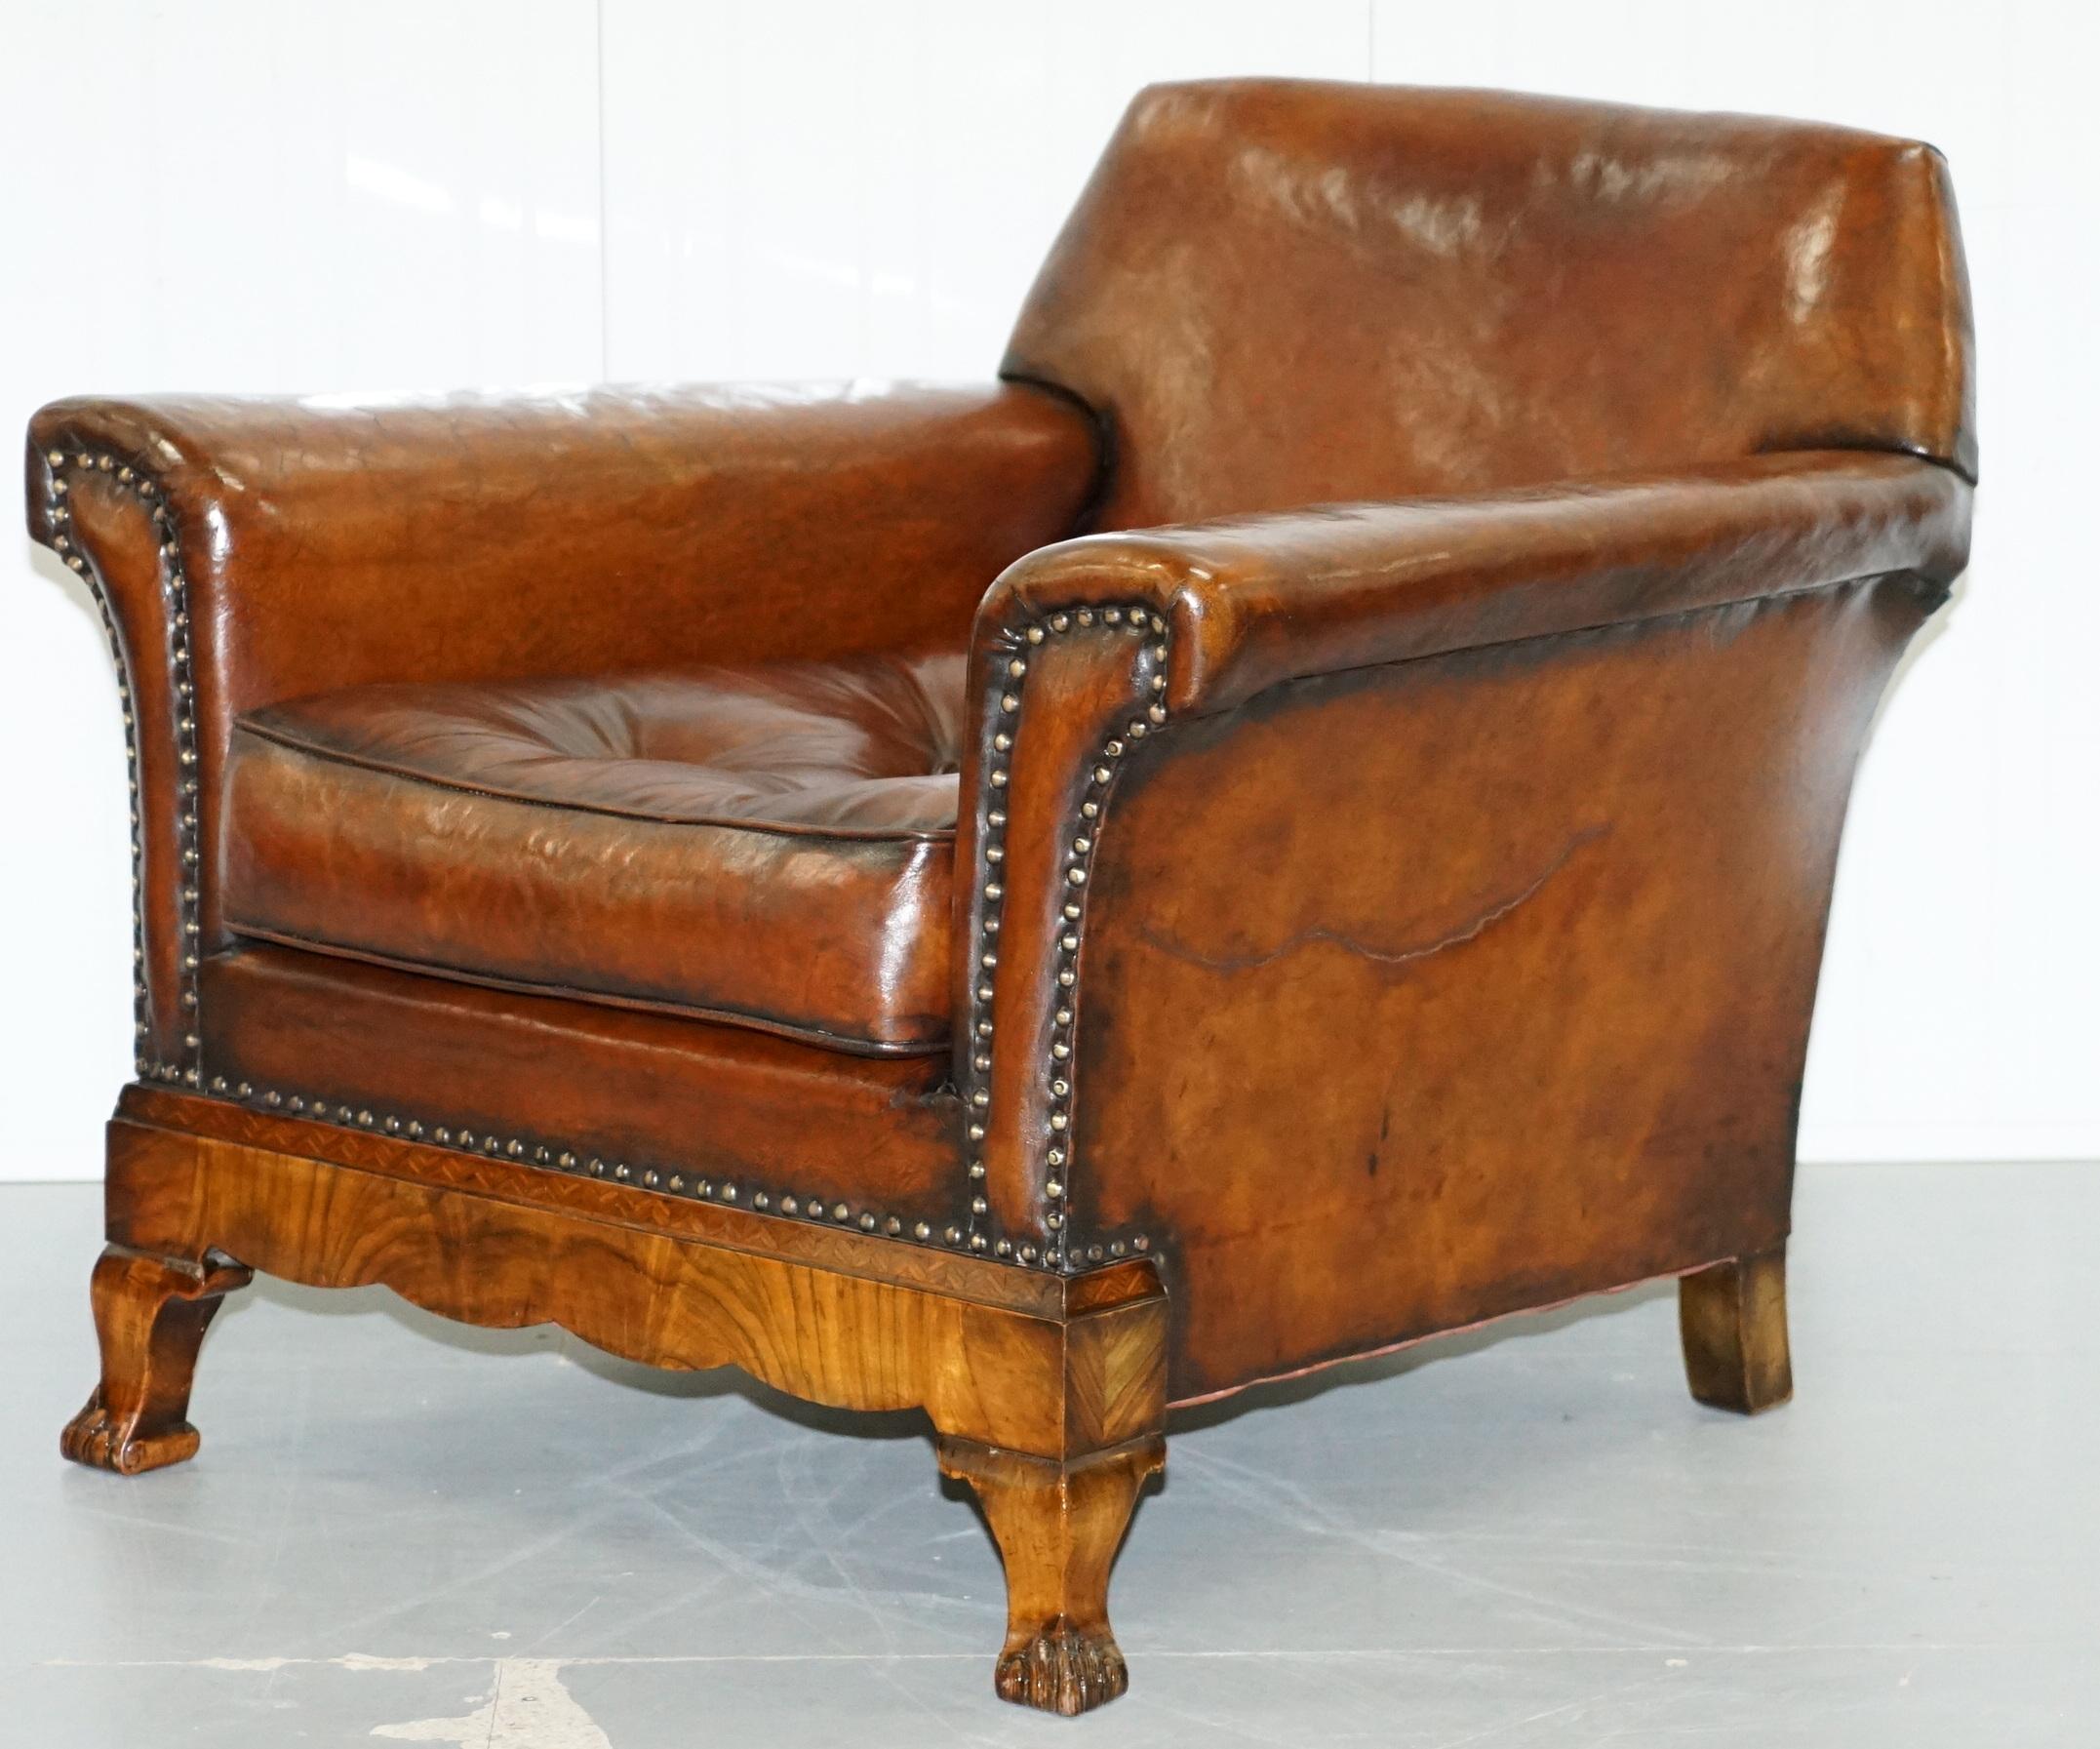 We are delighted to offer for sale this stunning very rare fully restored cigar brown leather Gentleman's club suite with Thomas Chippendale floating button cushions and marquetry inlaid walnut legs 

Where to begin! This suite is absolute eye